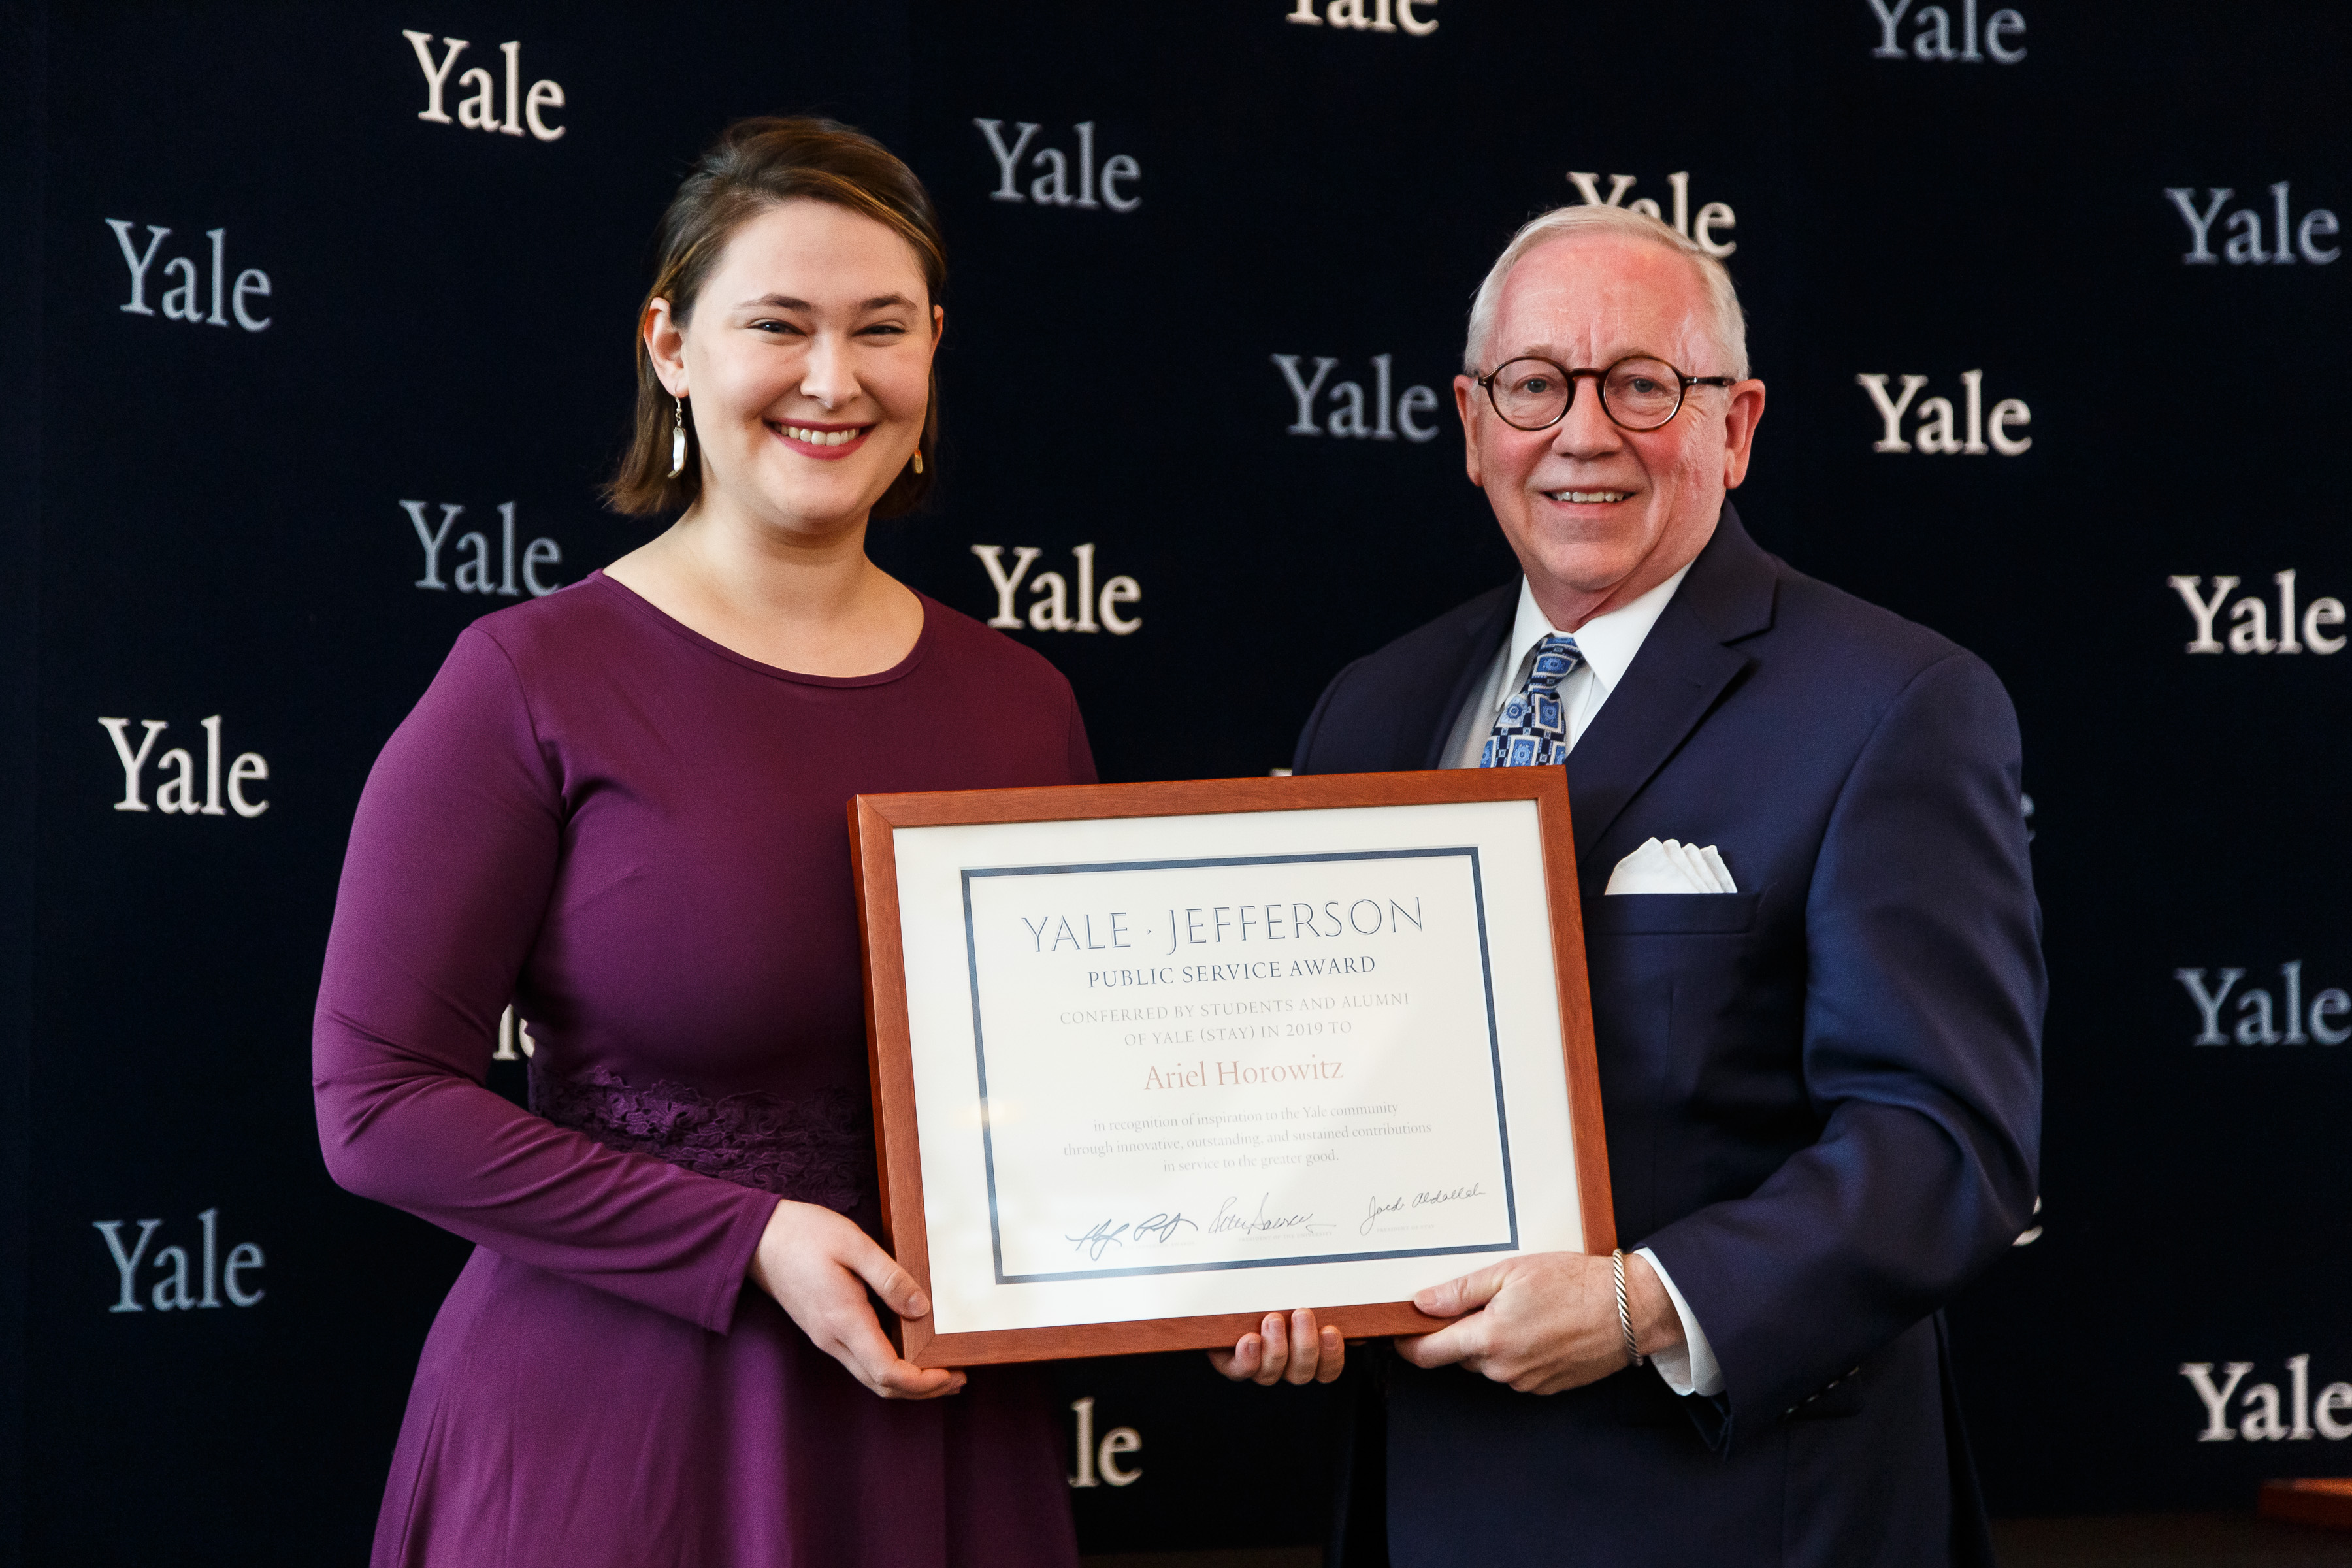 Henry '80 MDiv with Yale-Jefferson Award winner Ariel Horowitz at the 2019 YAA Assembly and Yale Alumni Fund Convocation